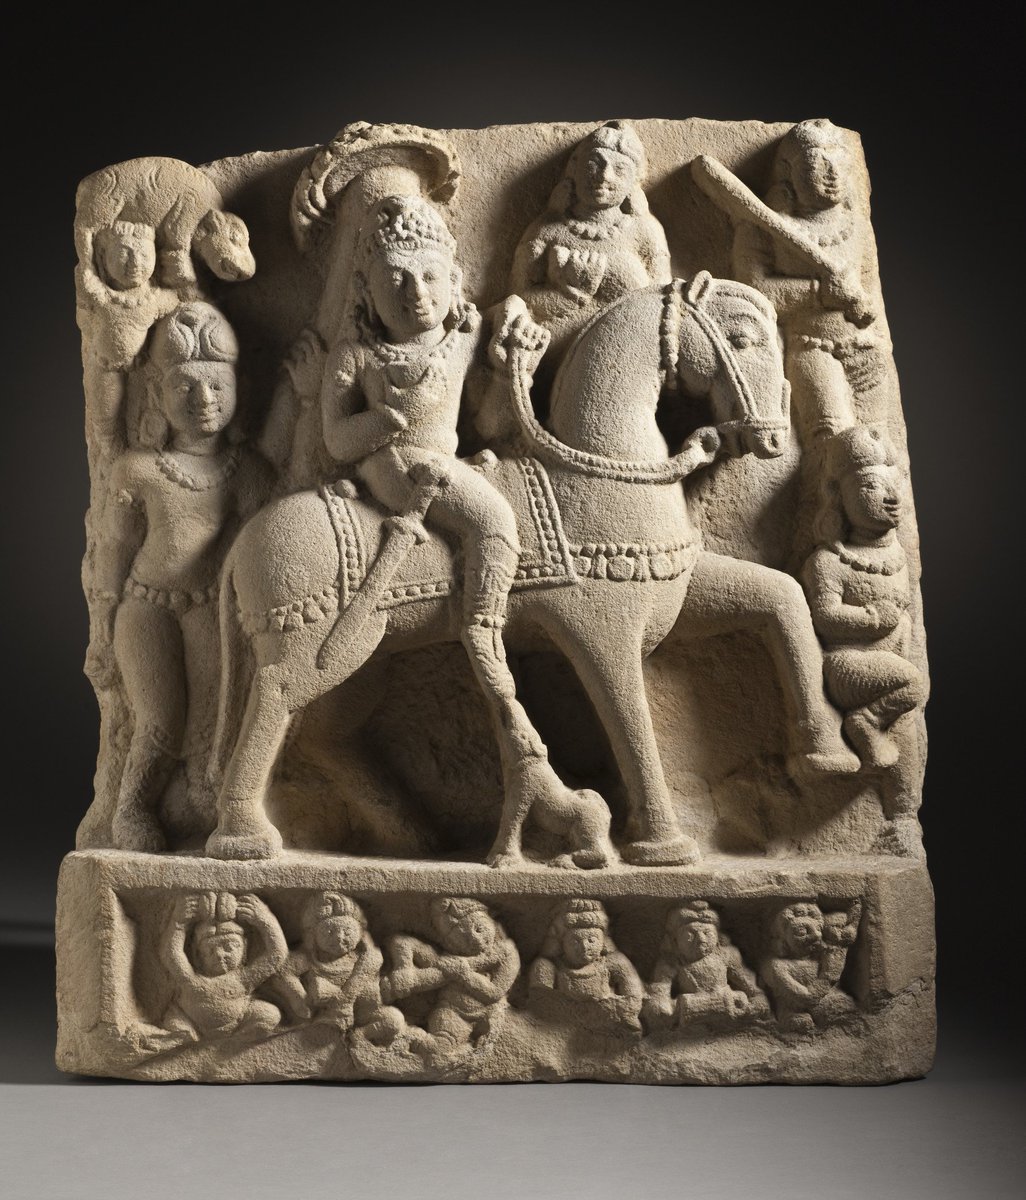 A 1300 yr old murthi of Revanta, son of Lord Surya. He is seen here riding a horse accompanied by attendants known as Guhyakas, whose chief he is. Notice he is wearing long boots. One of the guhyaka is also carrying a boar on his shoulder. Stolen  @lacma  https://collections.lacma.org/node/240381 